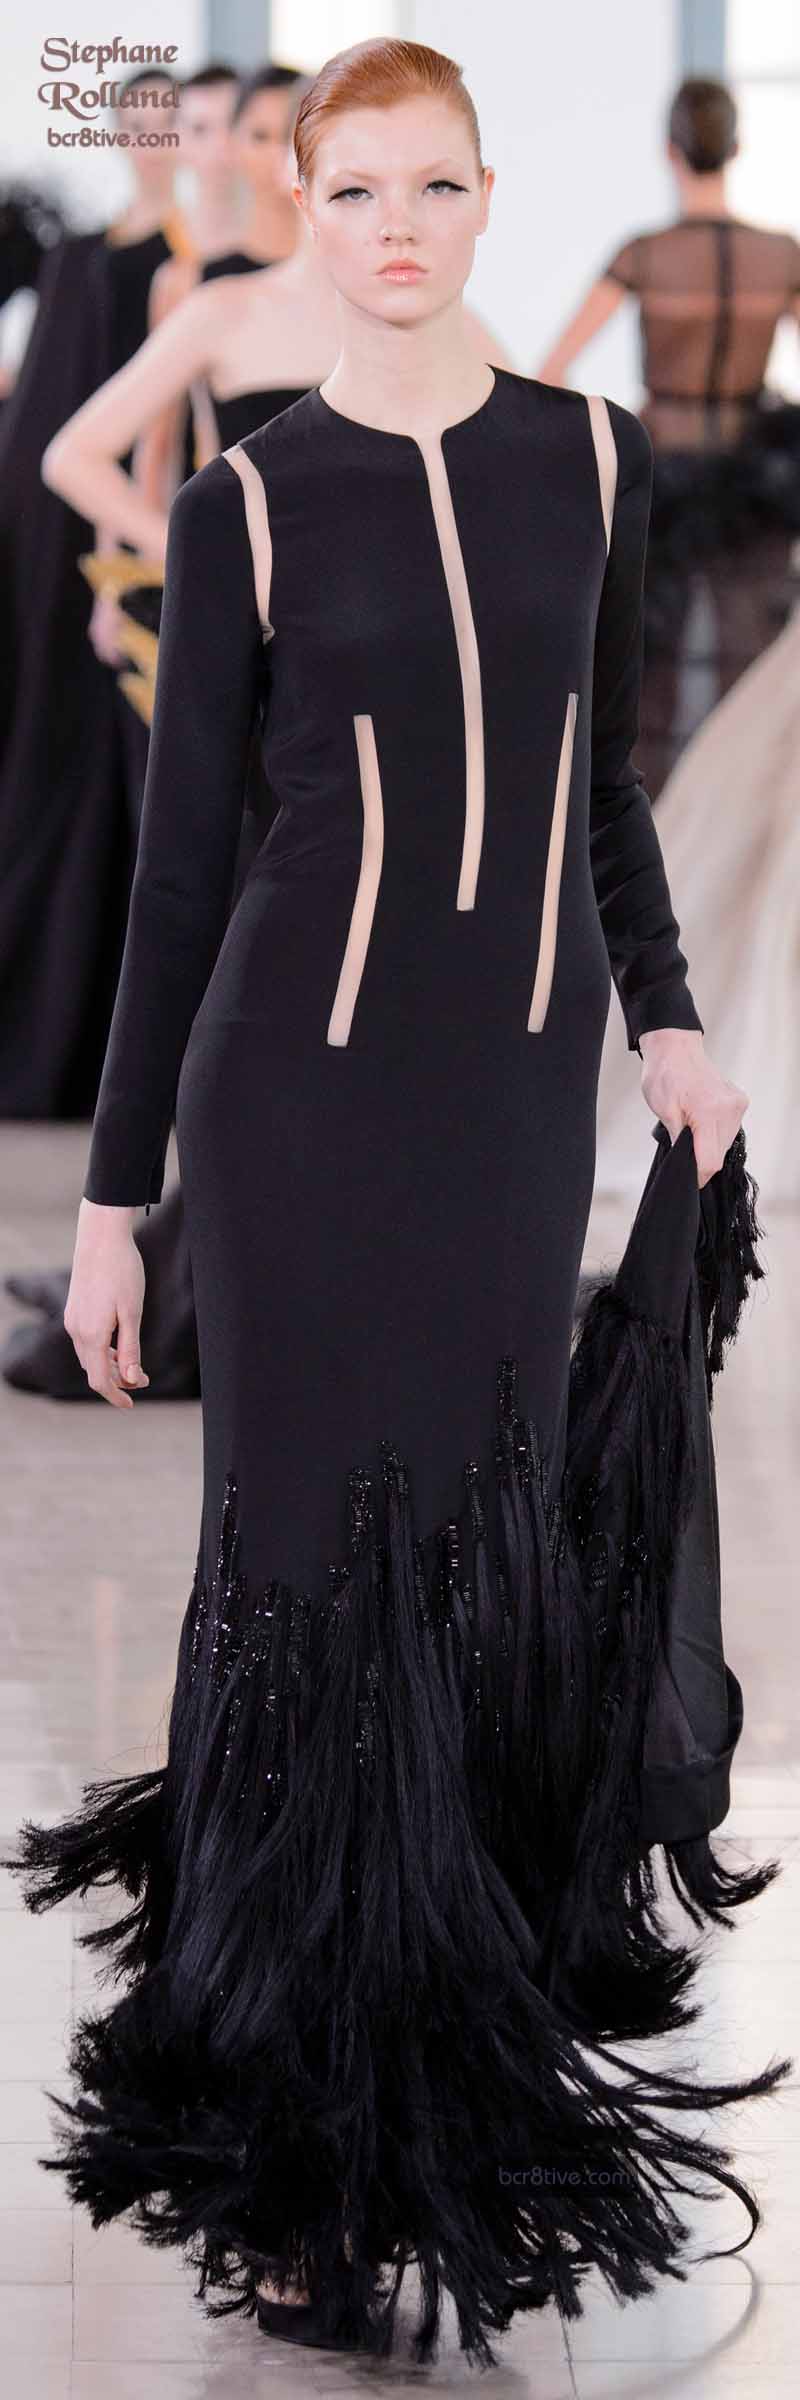 Stephane Rolland Couture Spring 2015 